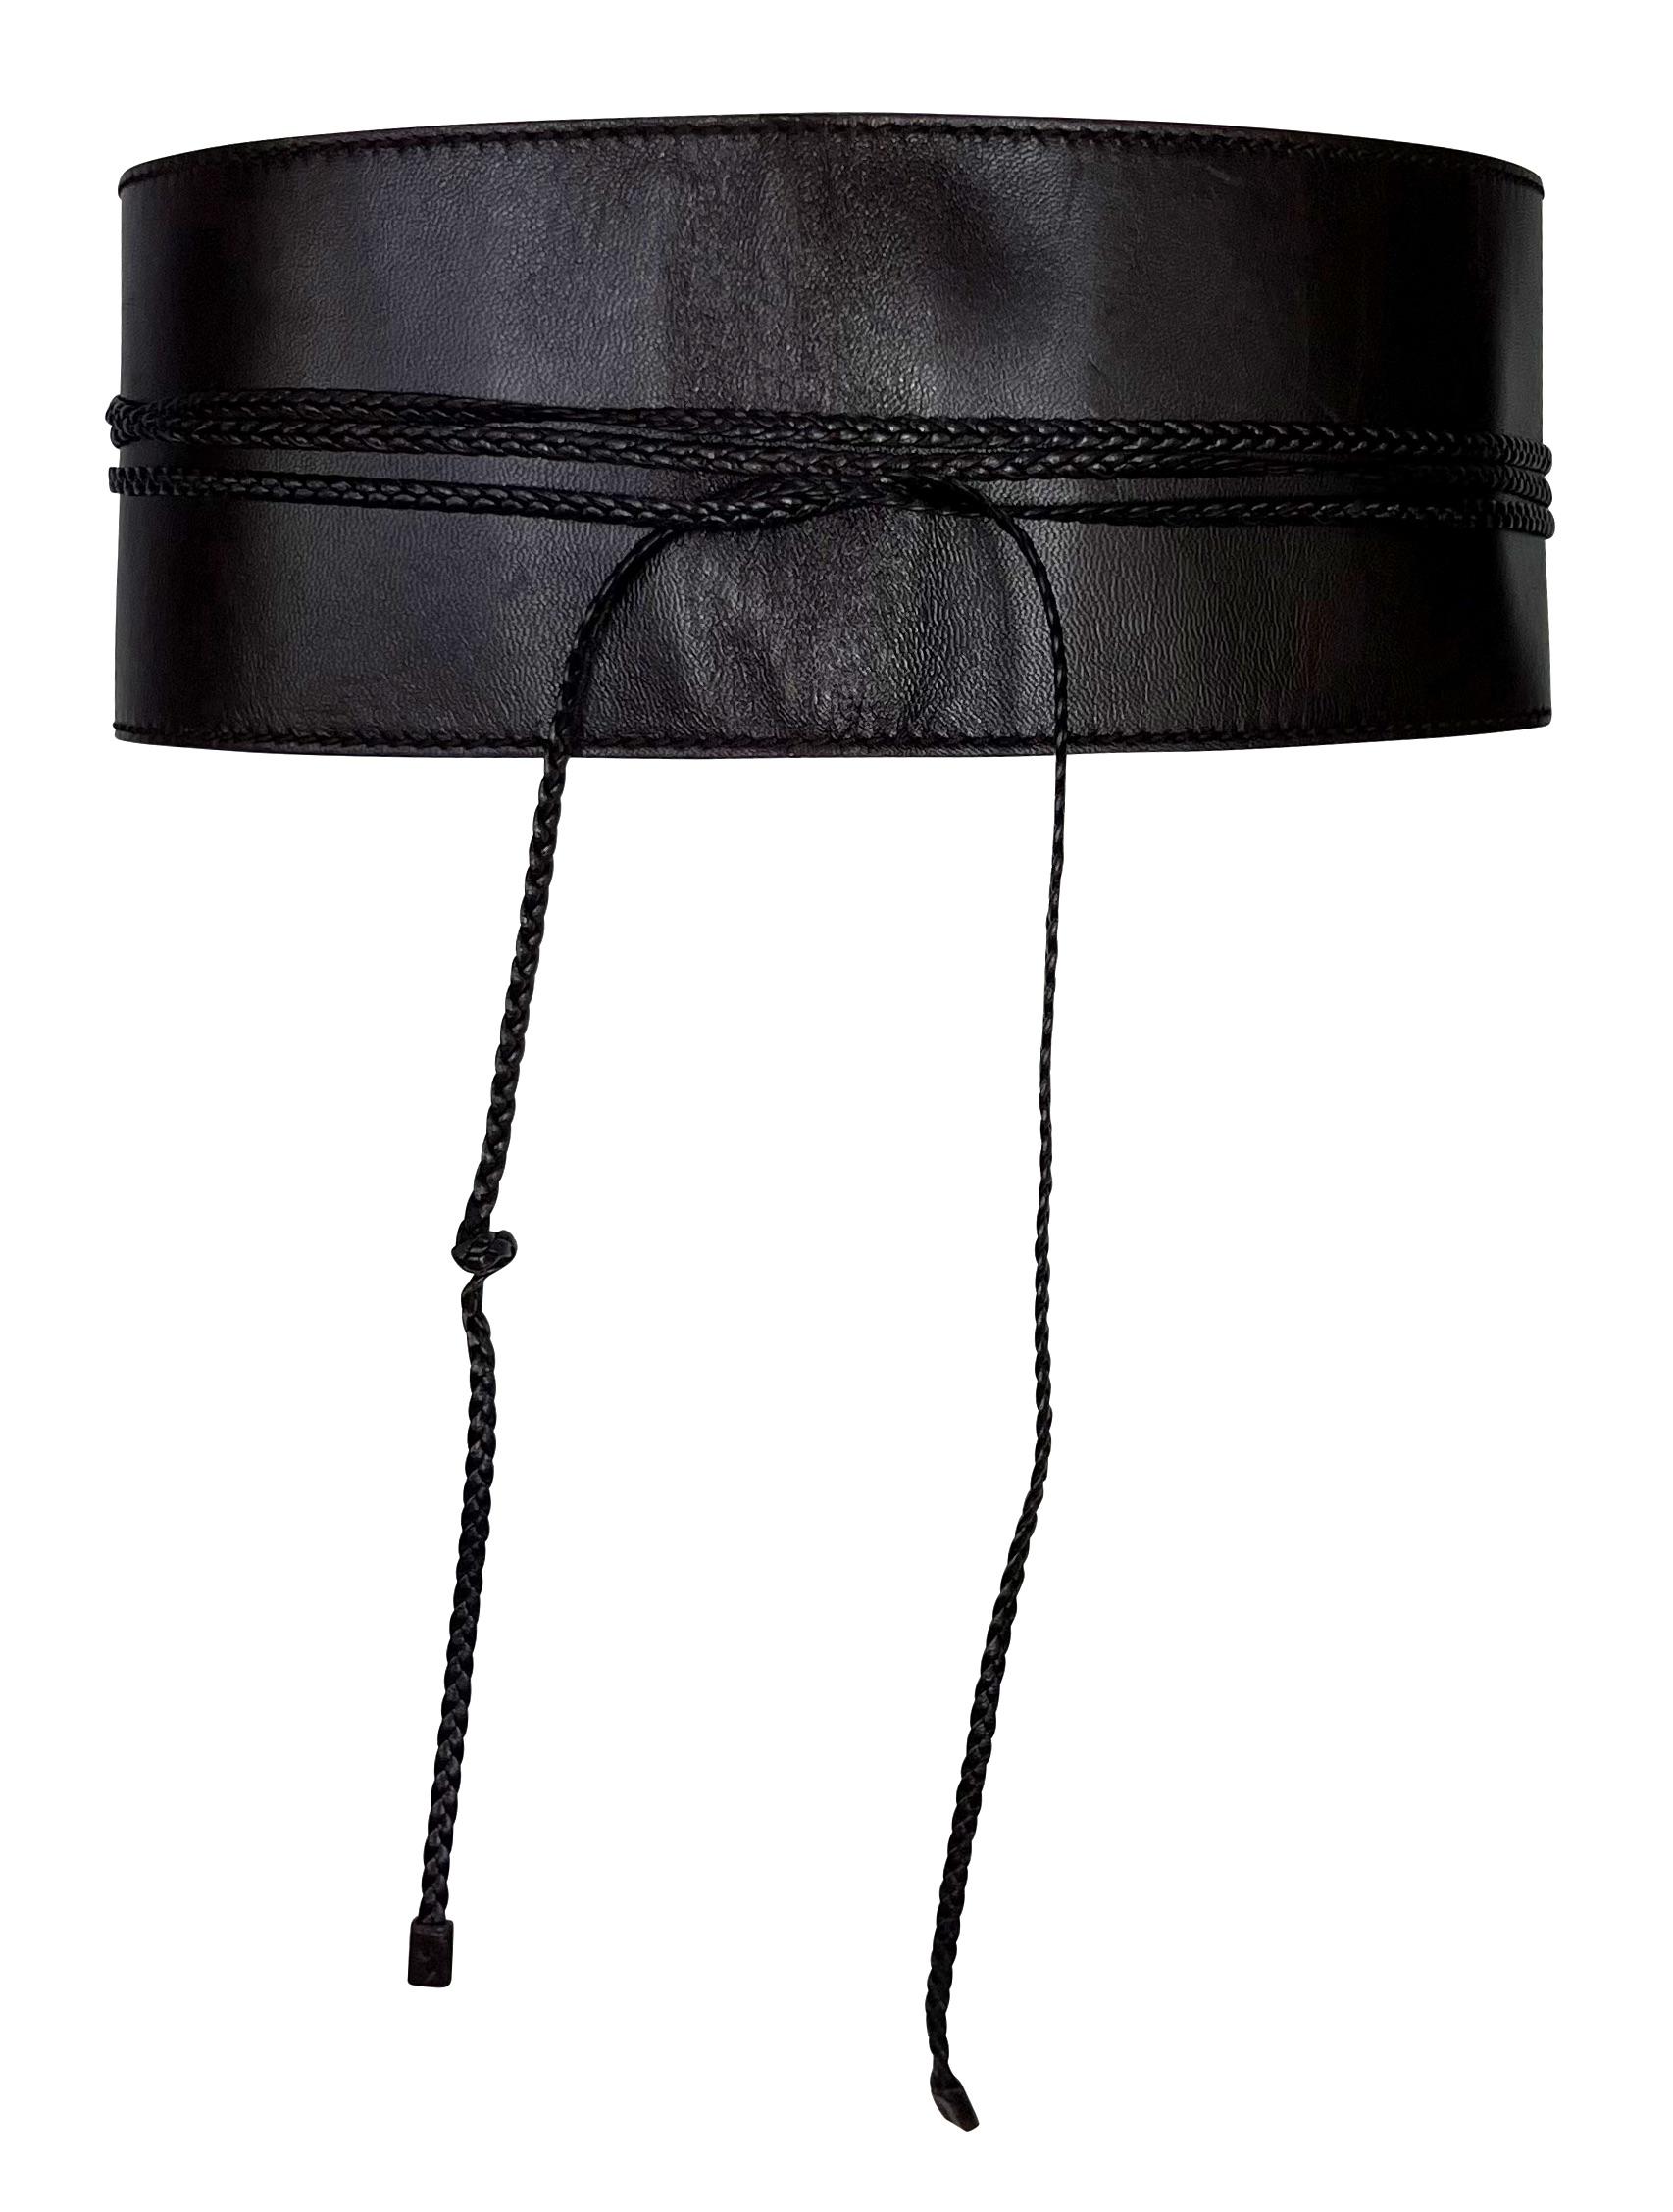 Women's F/W 2002 Gucci by Tom Ford Runway Ad Obi Braided Leather Wide Wrap Waist Belt For Sale